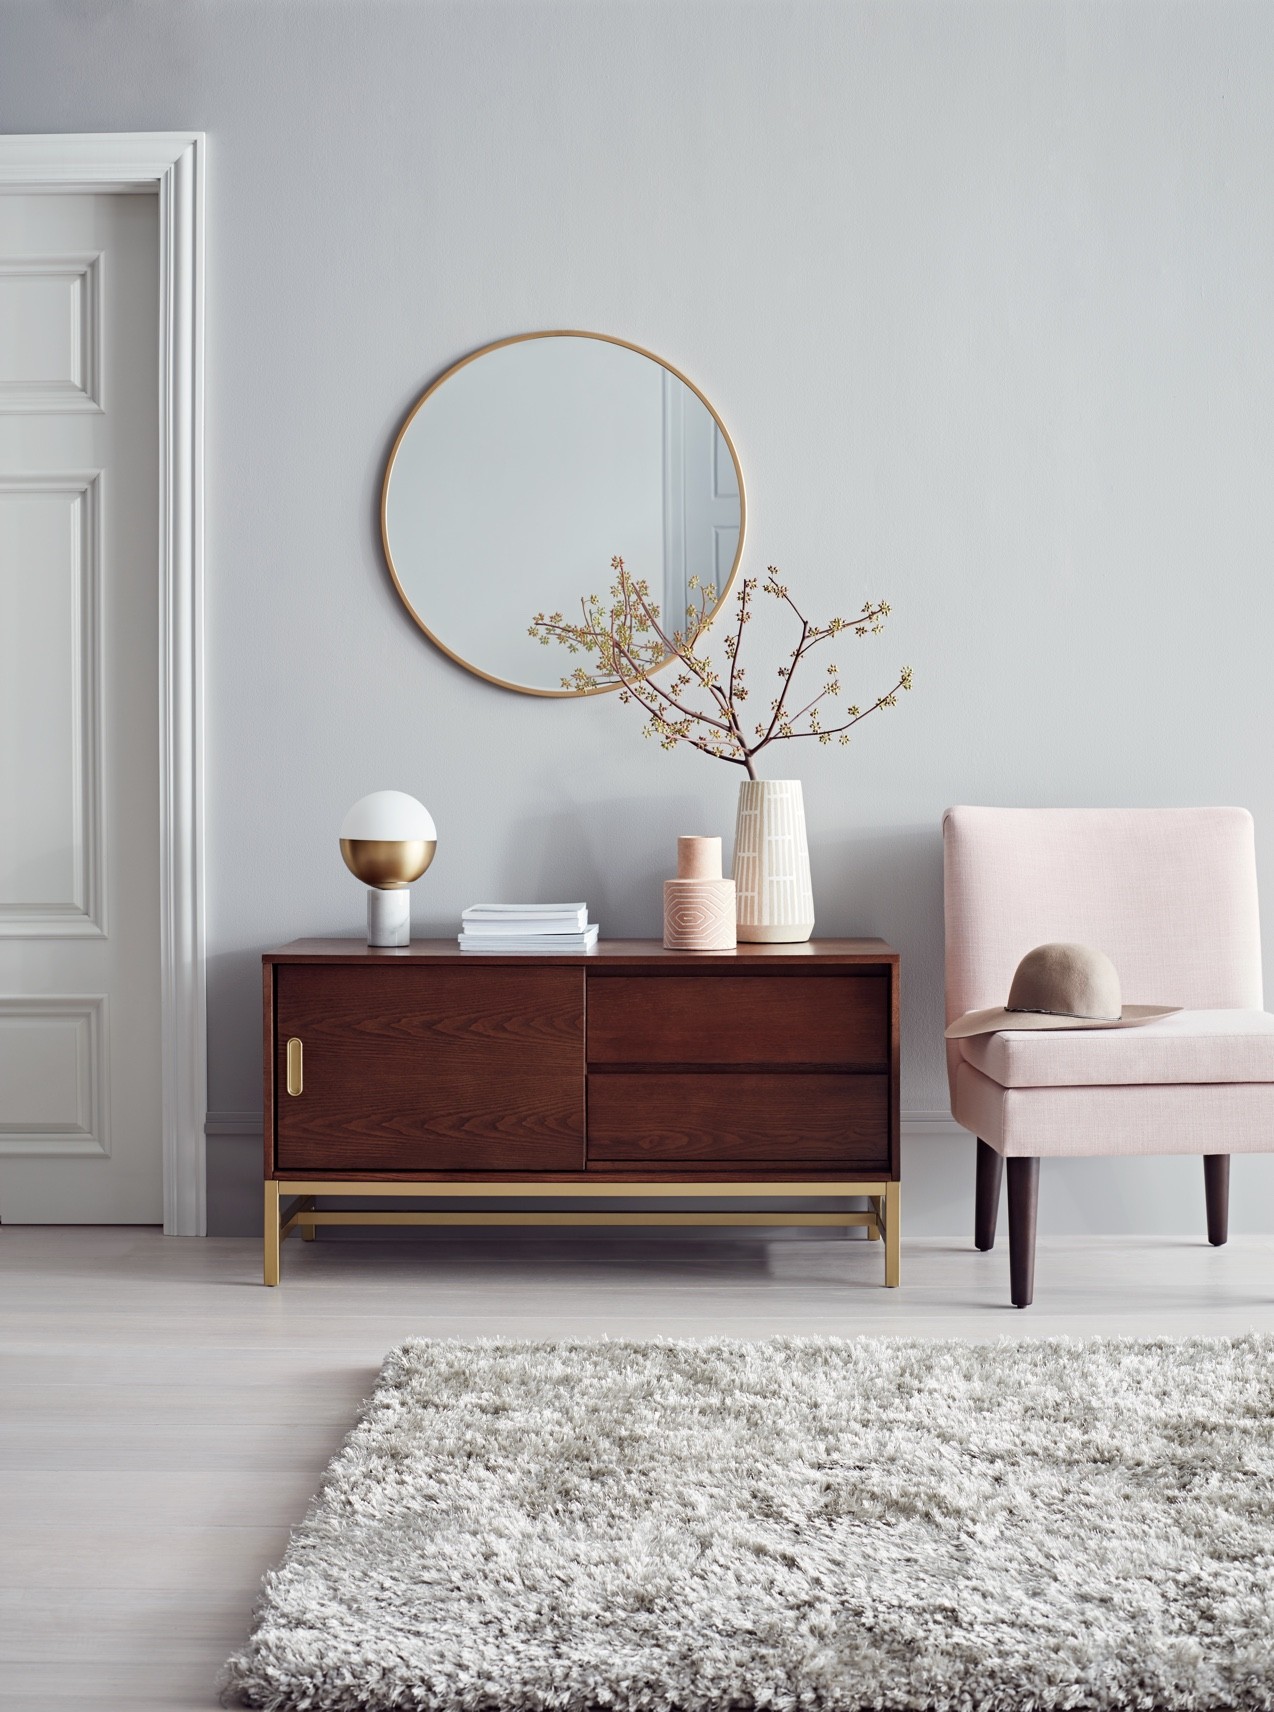 Target Debuts New Project 62 Furniture and Home Decor, And We LOVE It